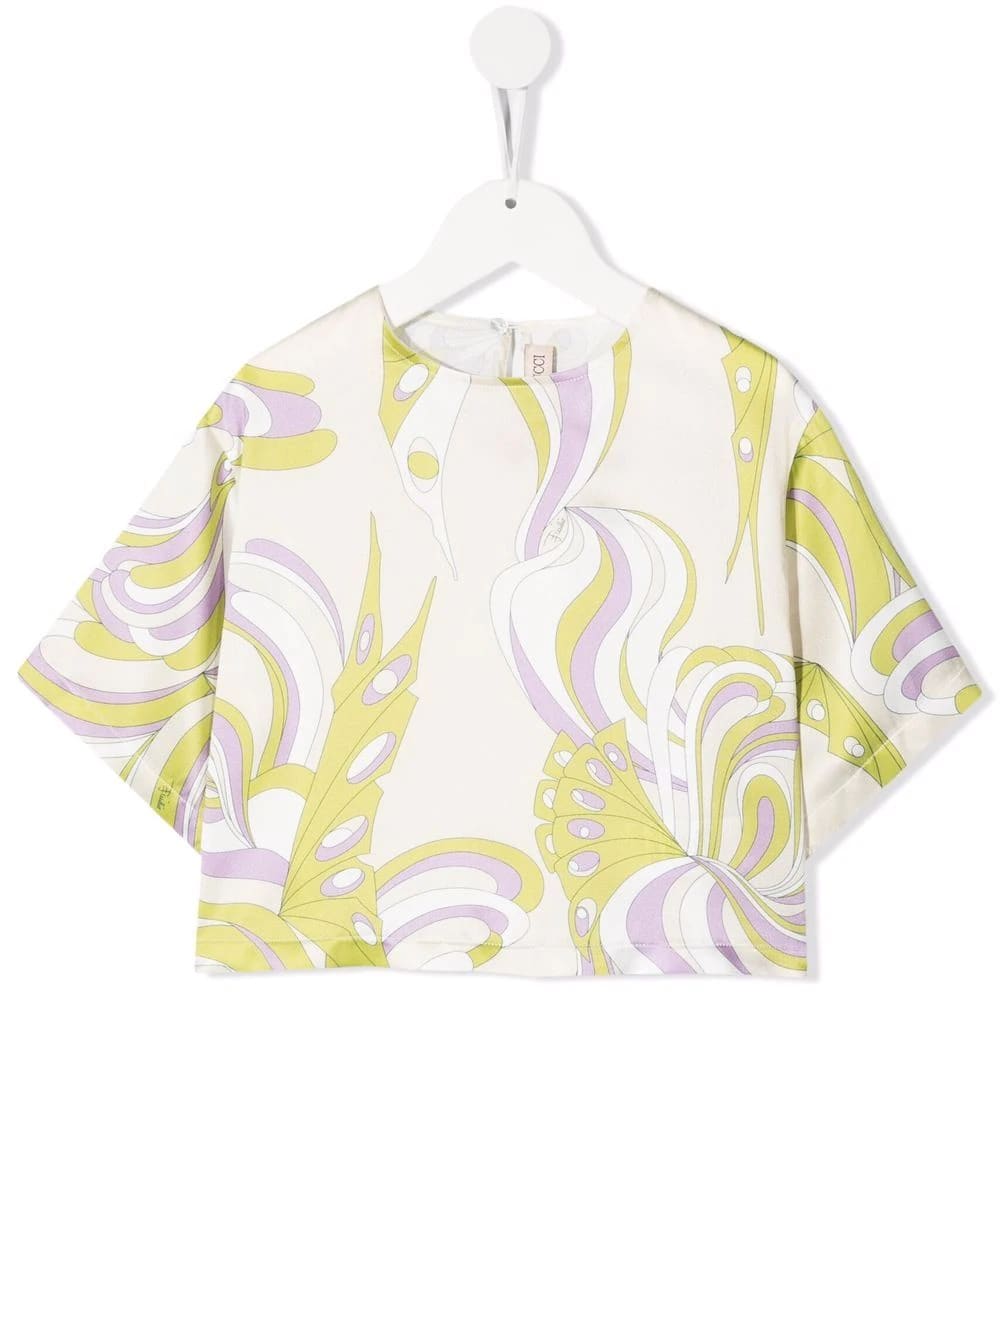 Emilio Pucci Kids White Top With Lilac And Light Green Print